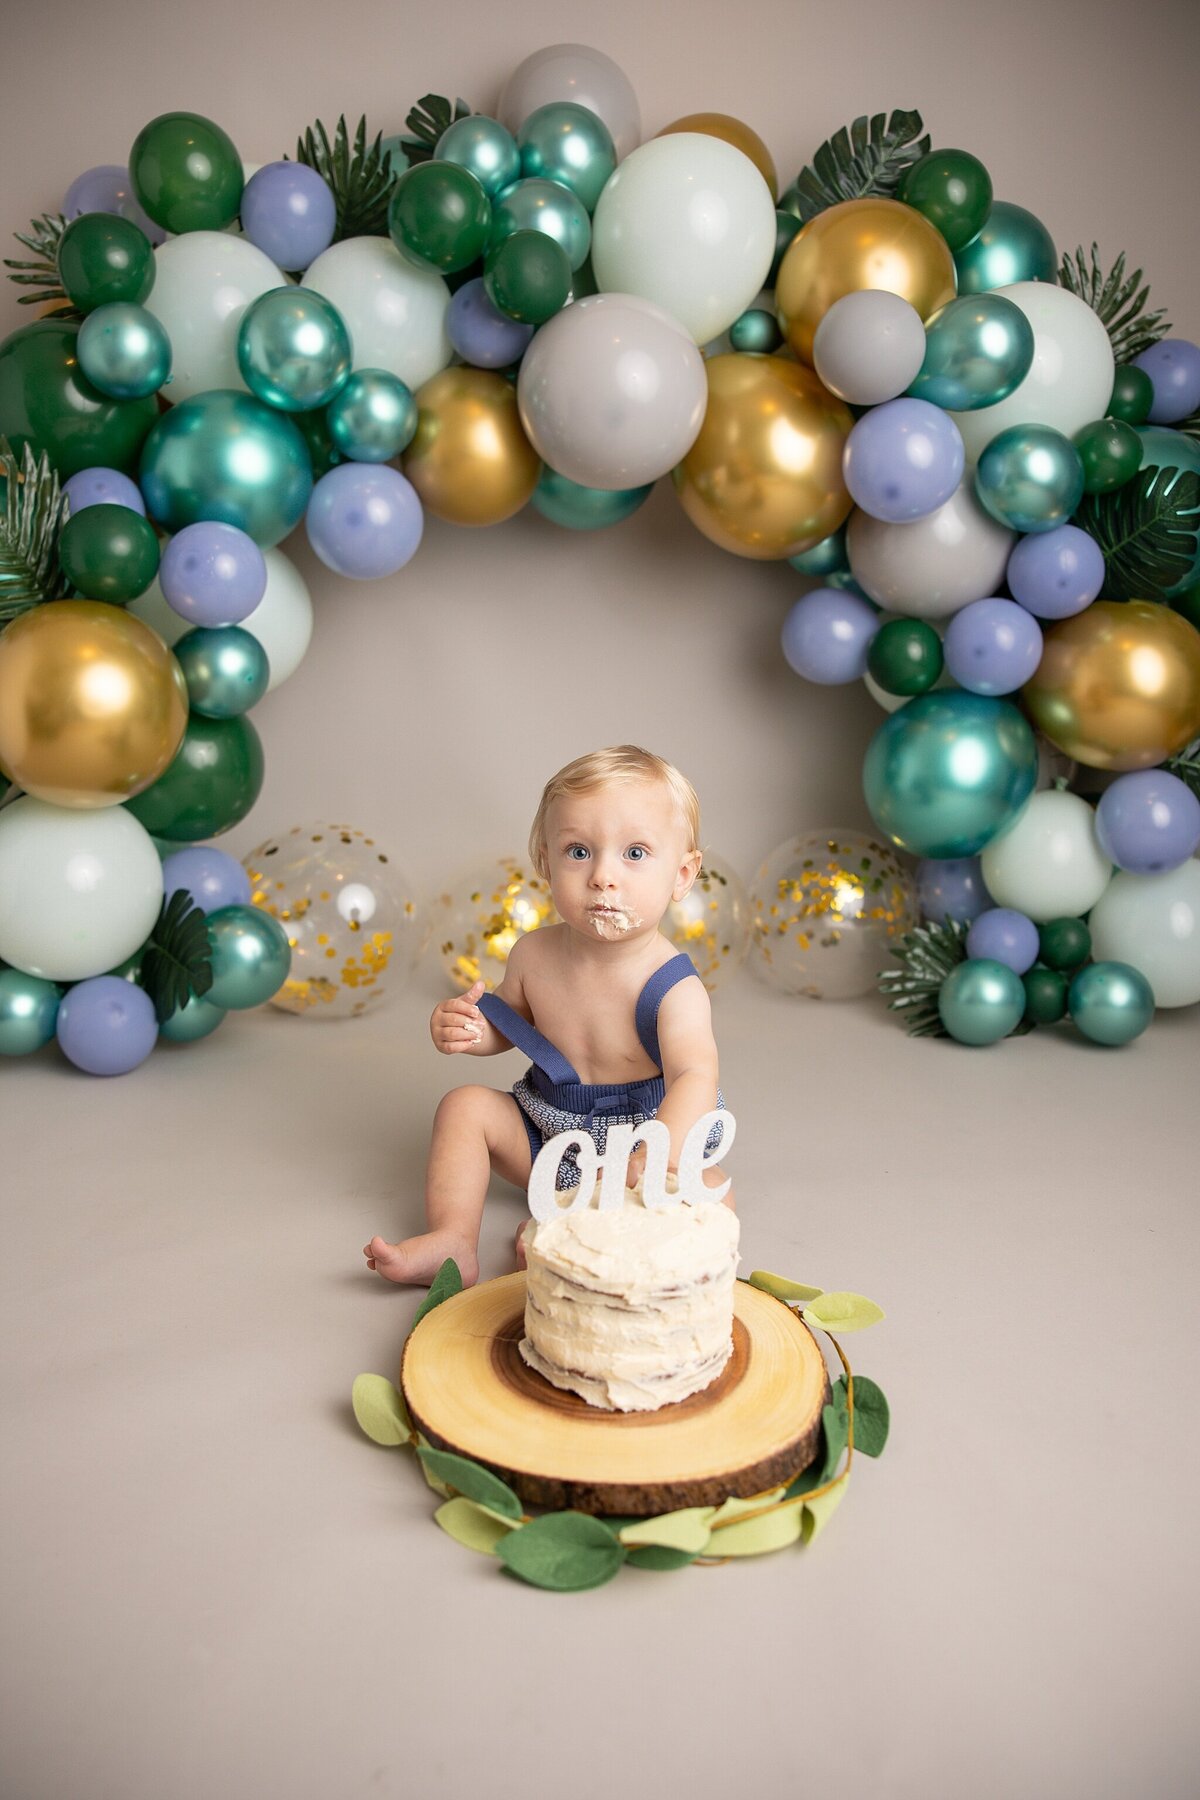 baby looking suprised in birthday cake smash pictures